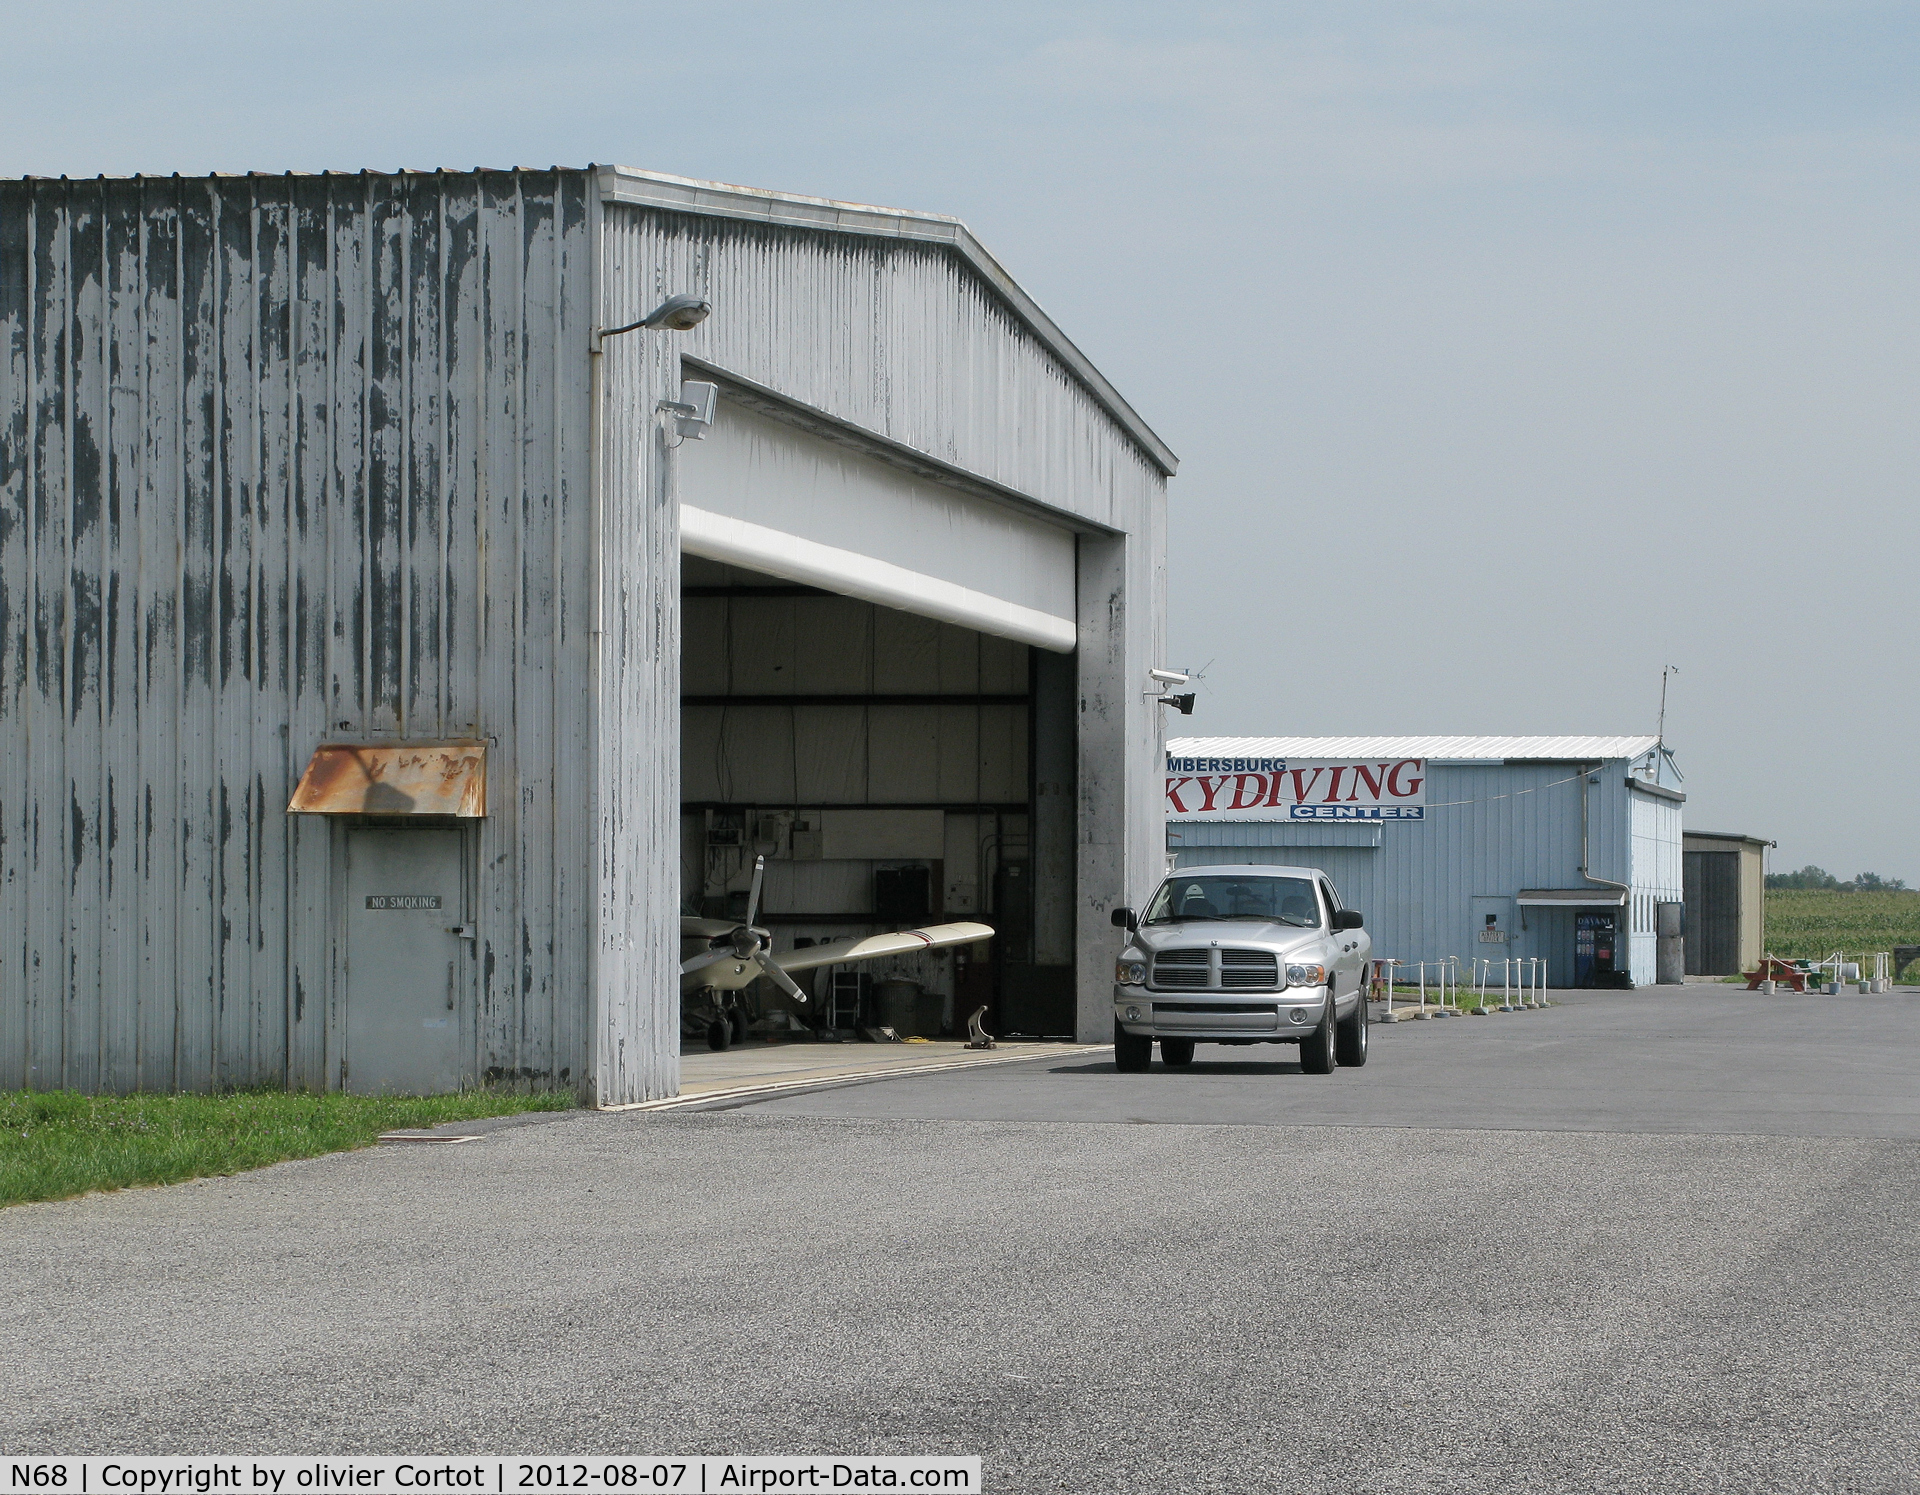 Franklin County Regional Airport (N68) - View of the hangars